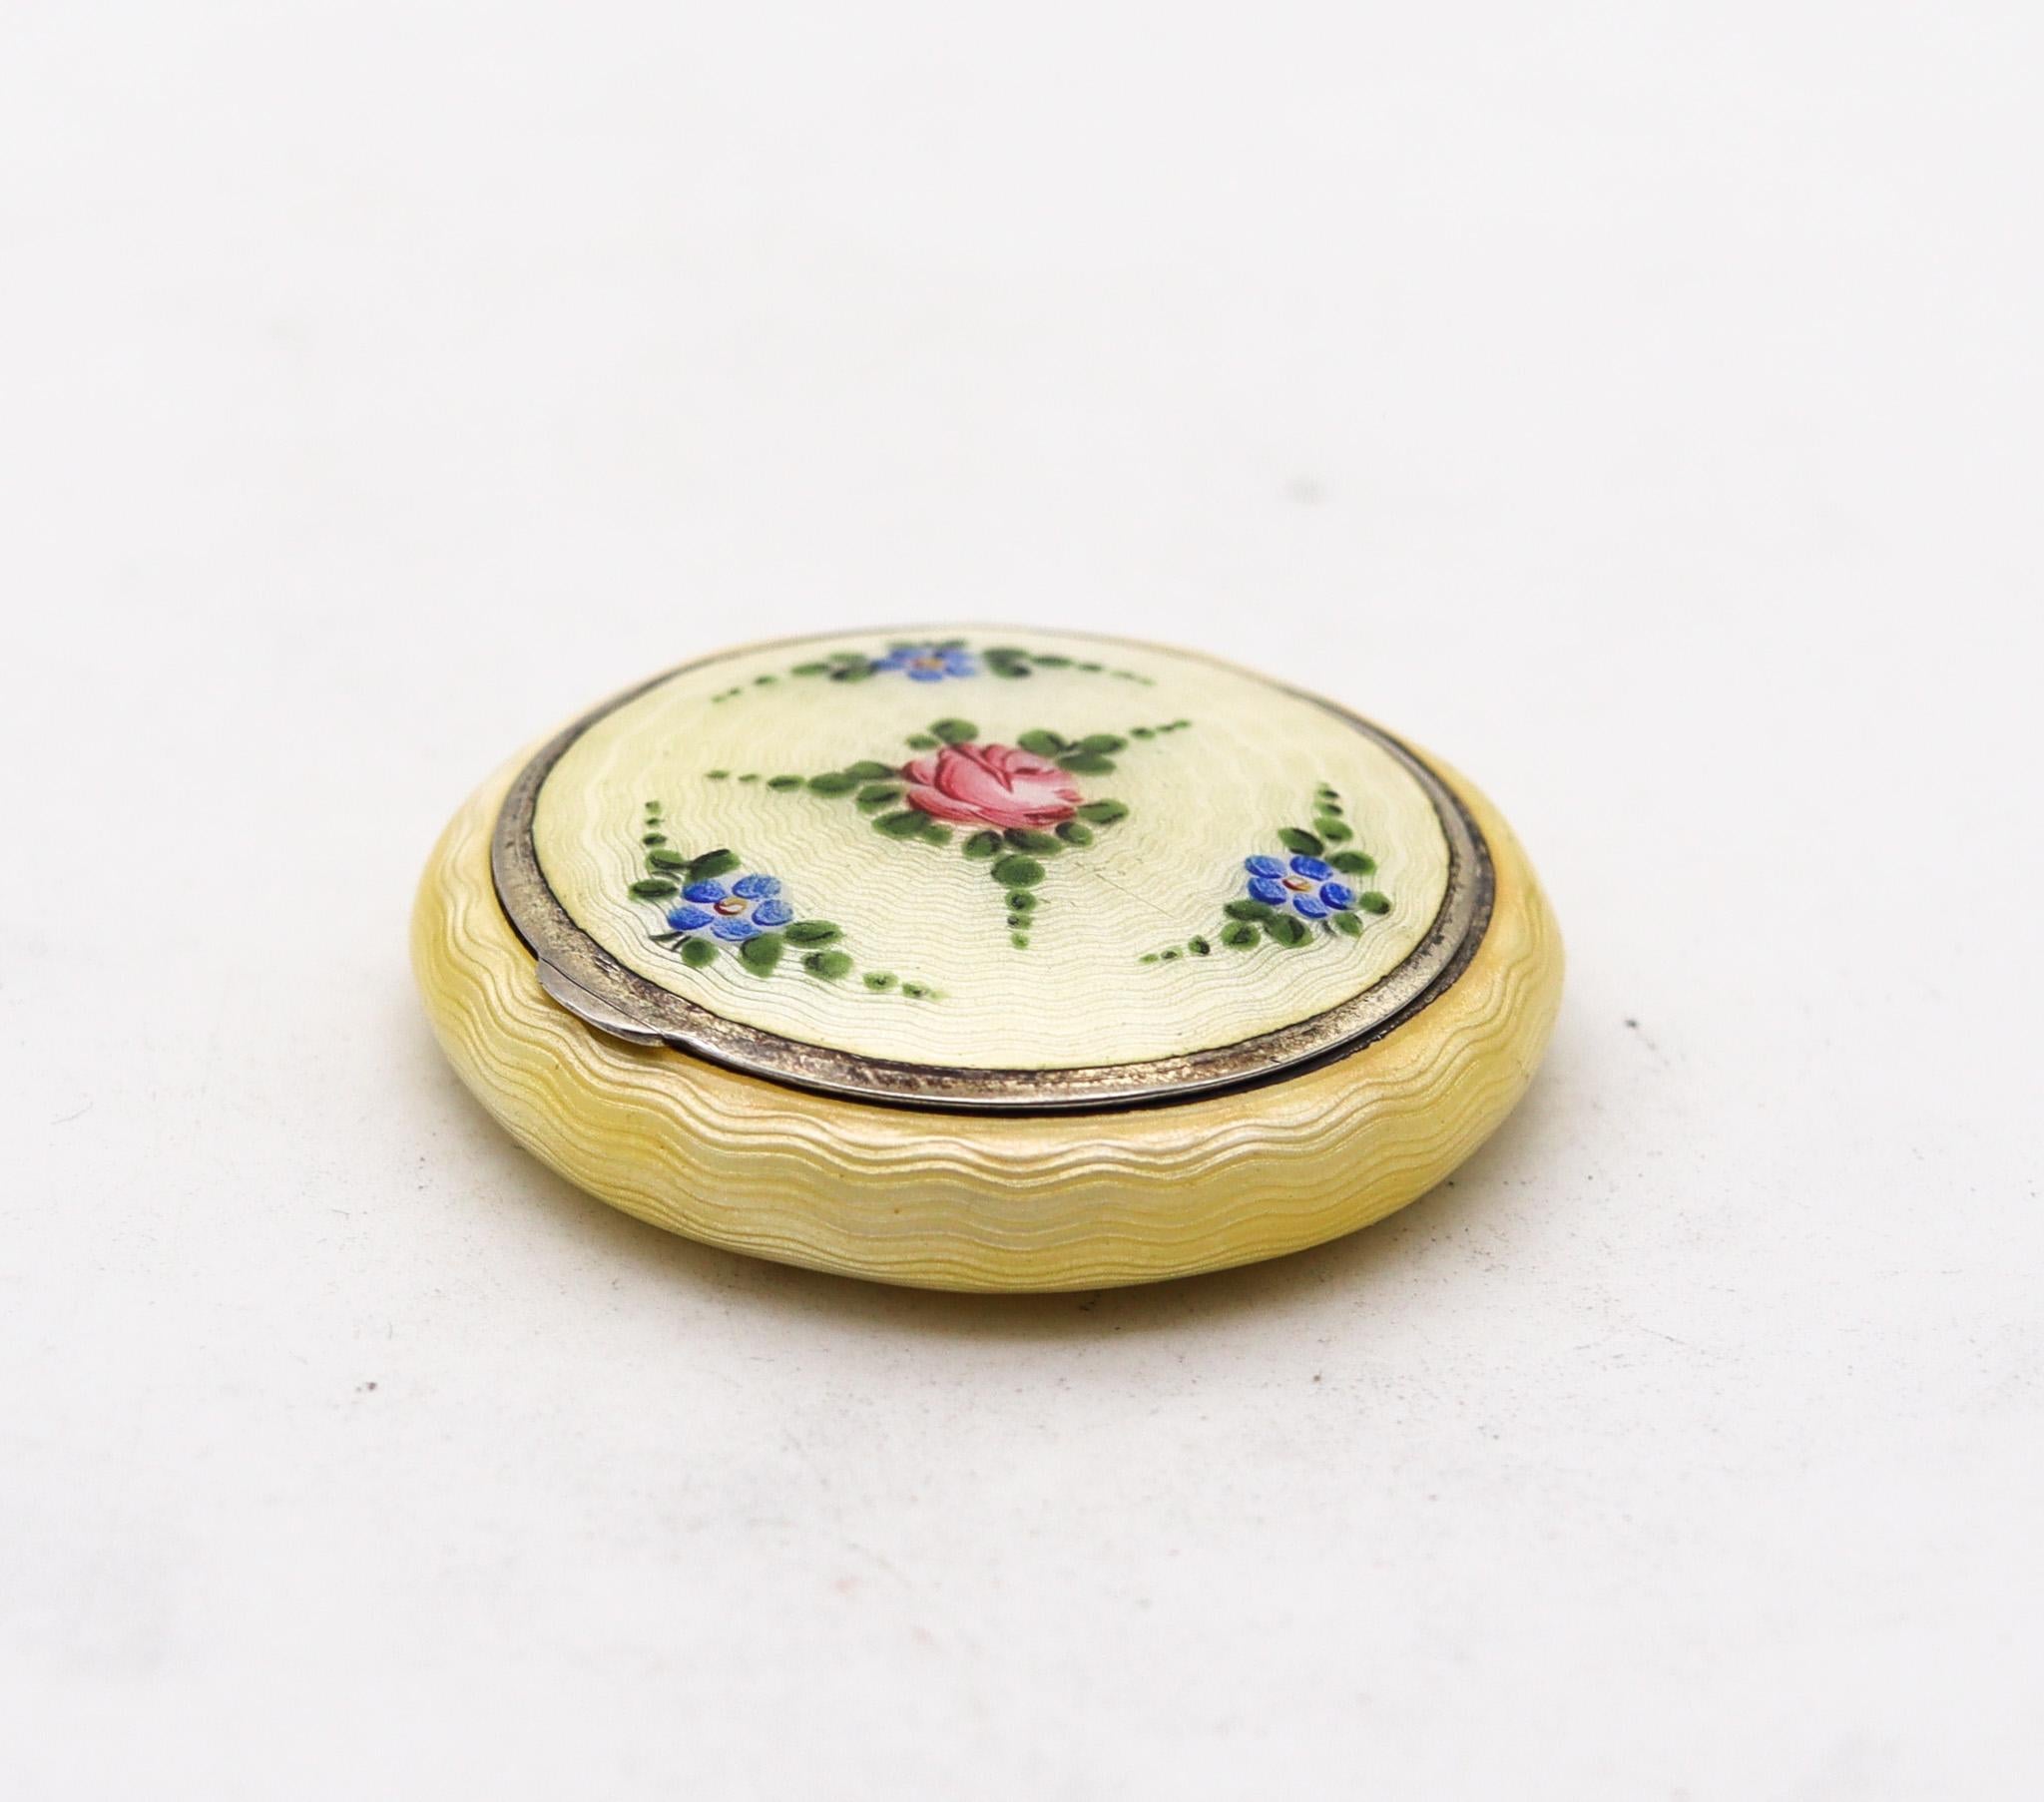 An art deco guilloche enamel box made by Bliss Brothers.

Beautiful enamel round box, created during the art deco period, back in the 1925. This beautiful antique piece was carefully crafted at the workshops of Bliss Brothers Company in solid